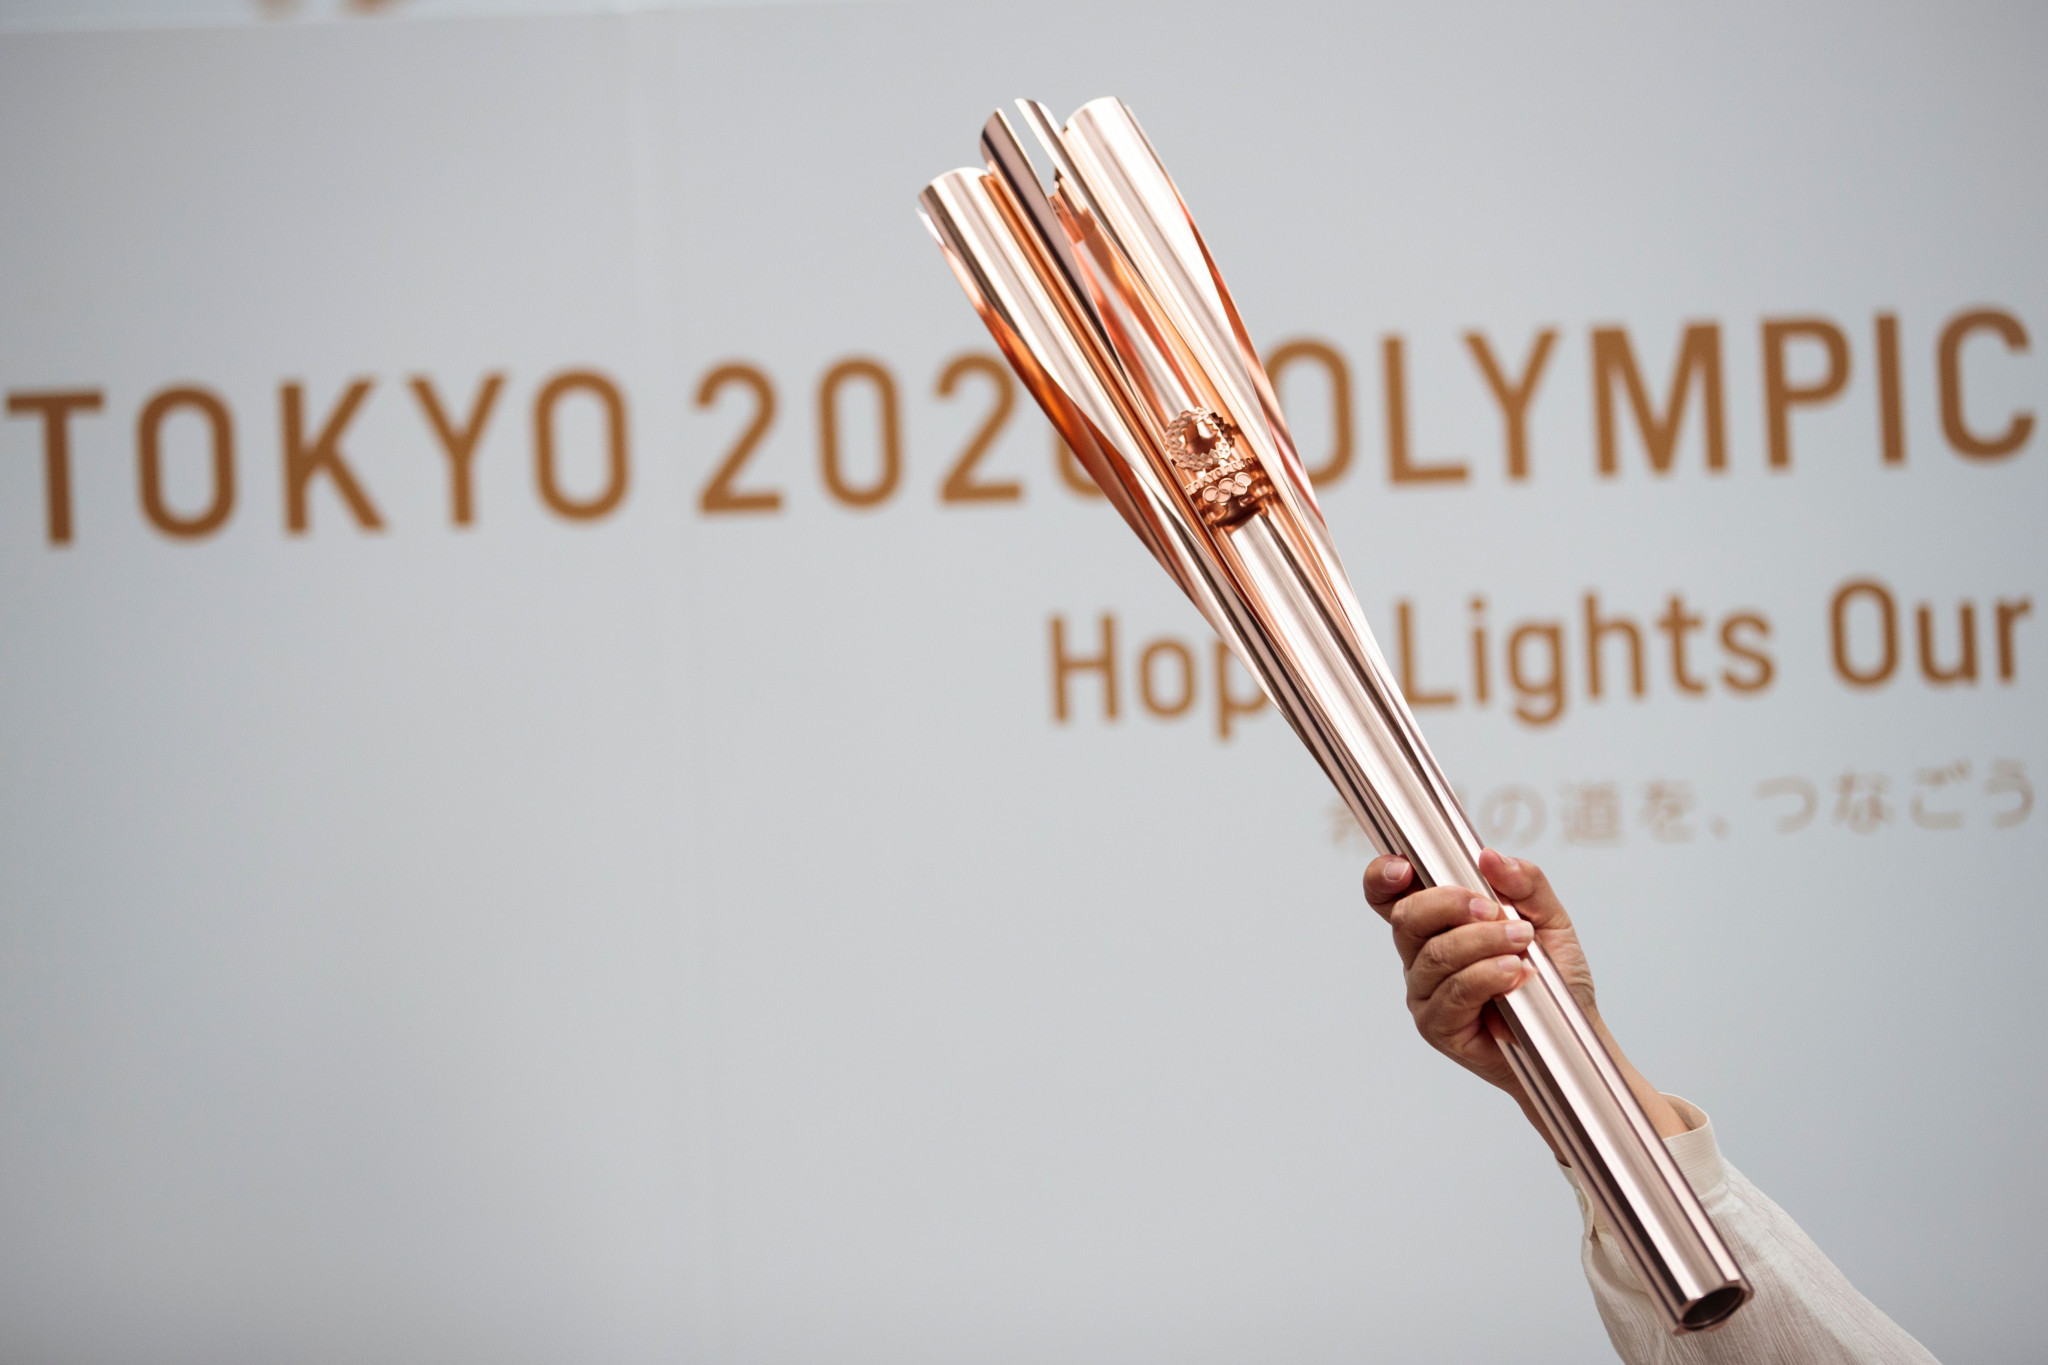 Tokyo 2020 receive more than 530,000 applications to run in Torch Relay